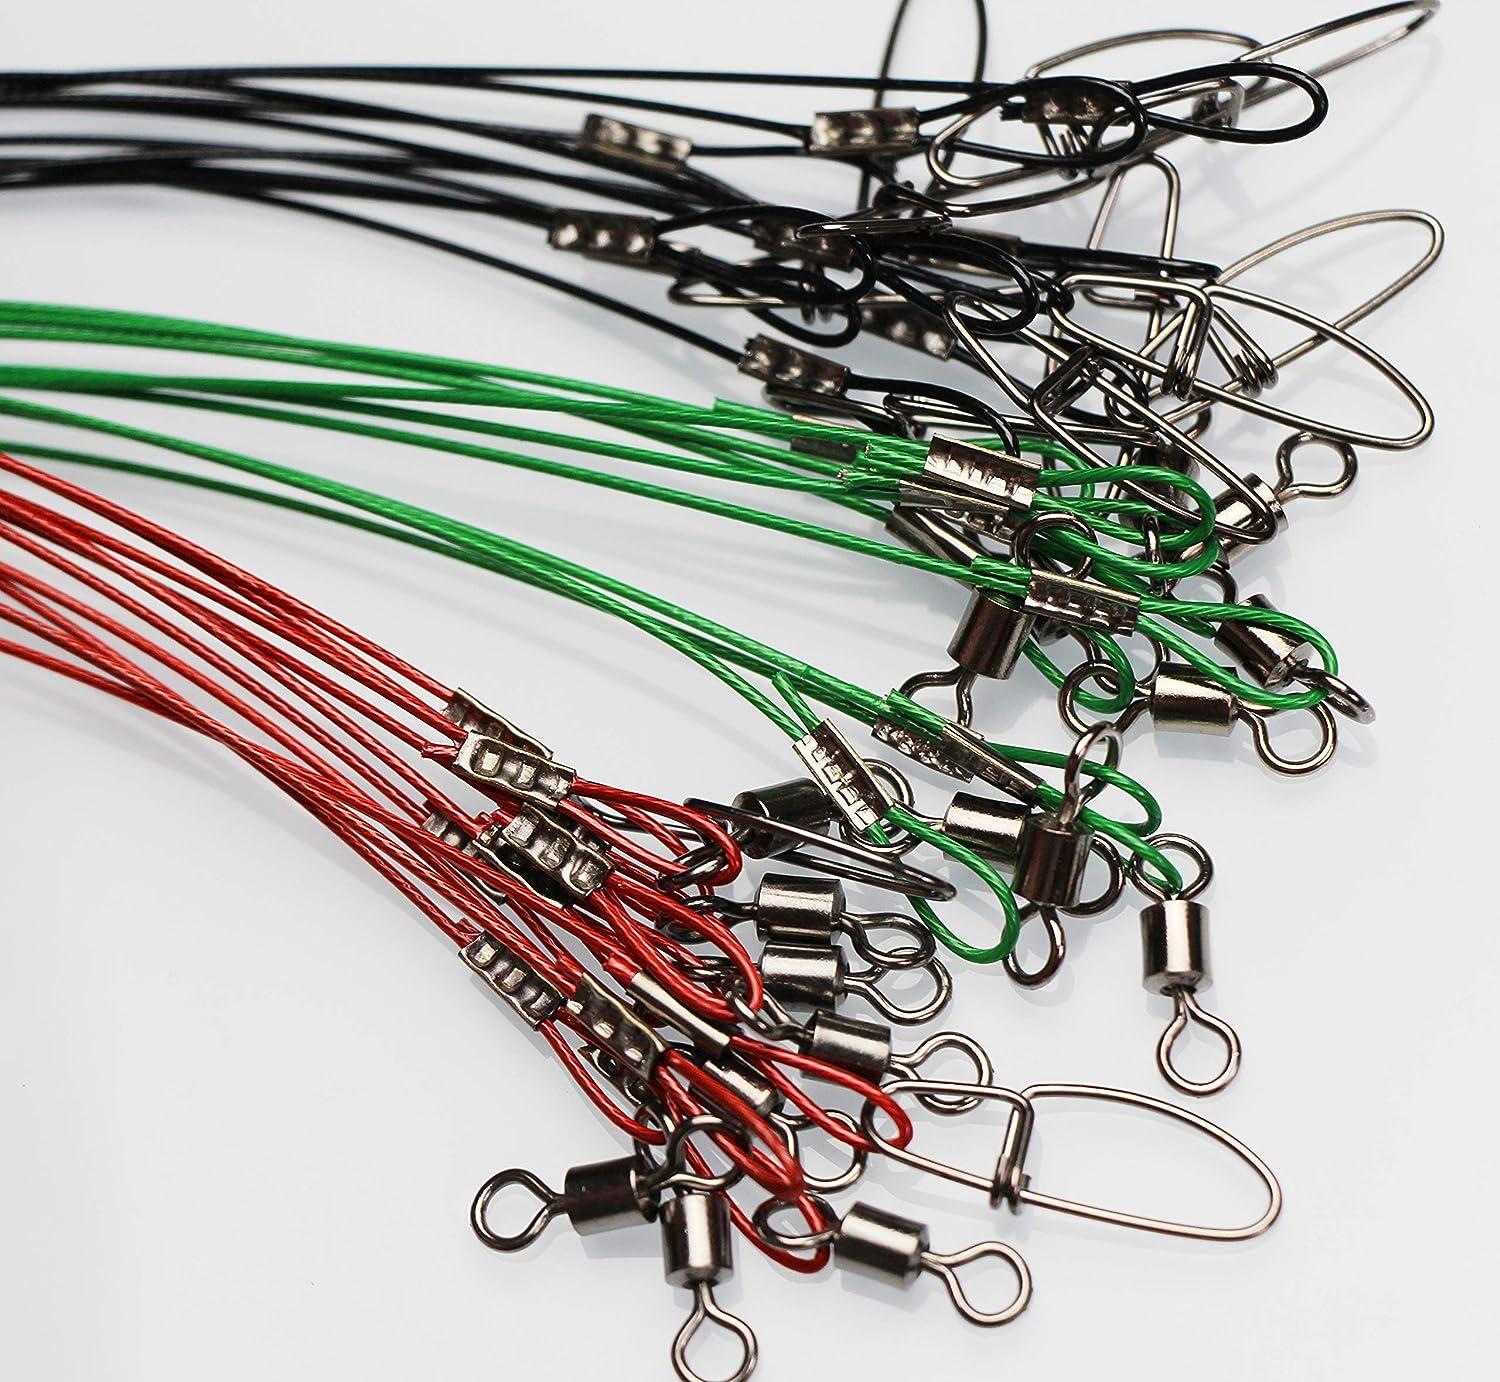 20pcs Fishing Wire Leaders Heavy Duty Fishing Stainless Steel Wire Leaders  150LB High Strength Fishing Leaders with Swivels and Snaps Black/Red/Green  Black Leader